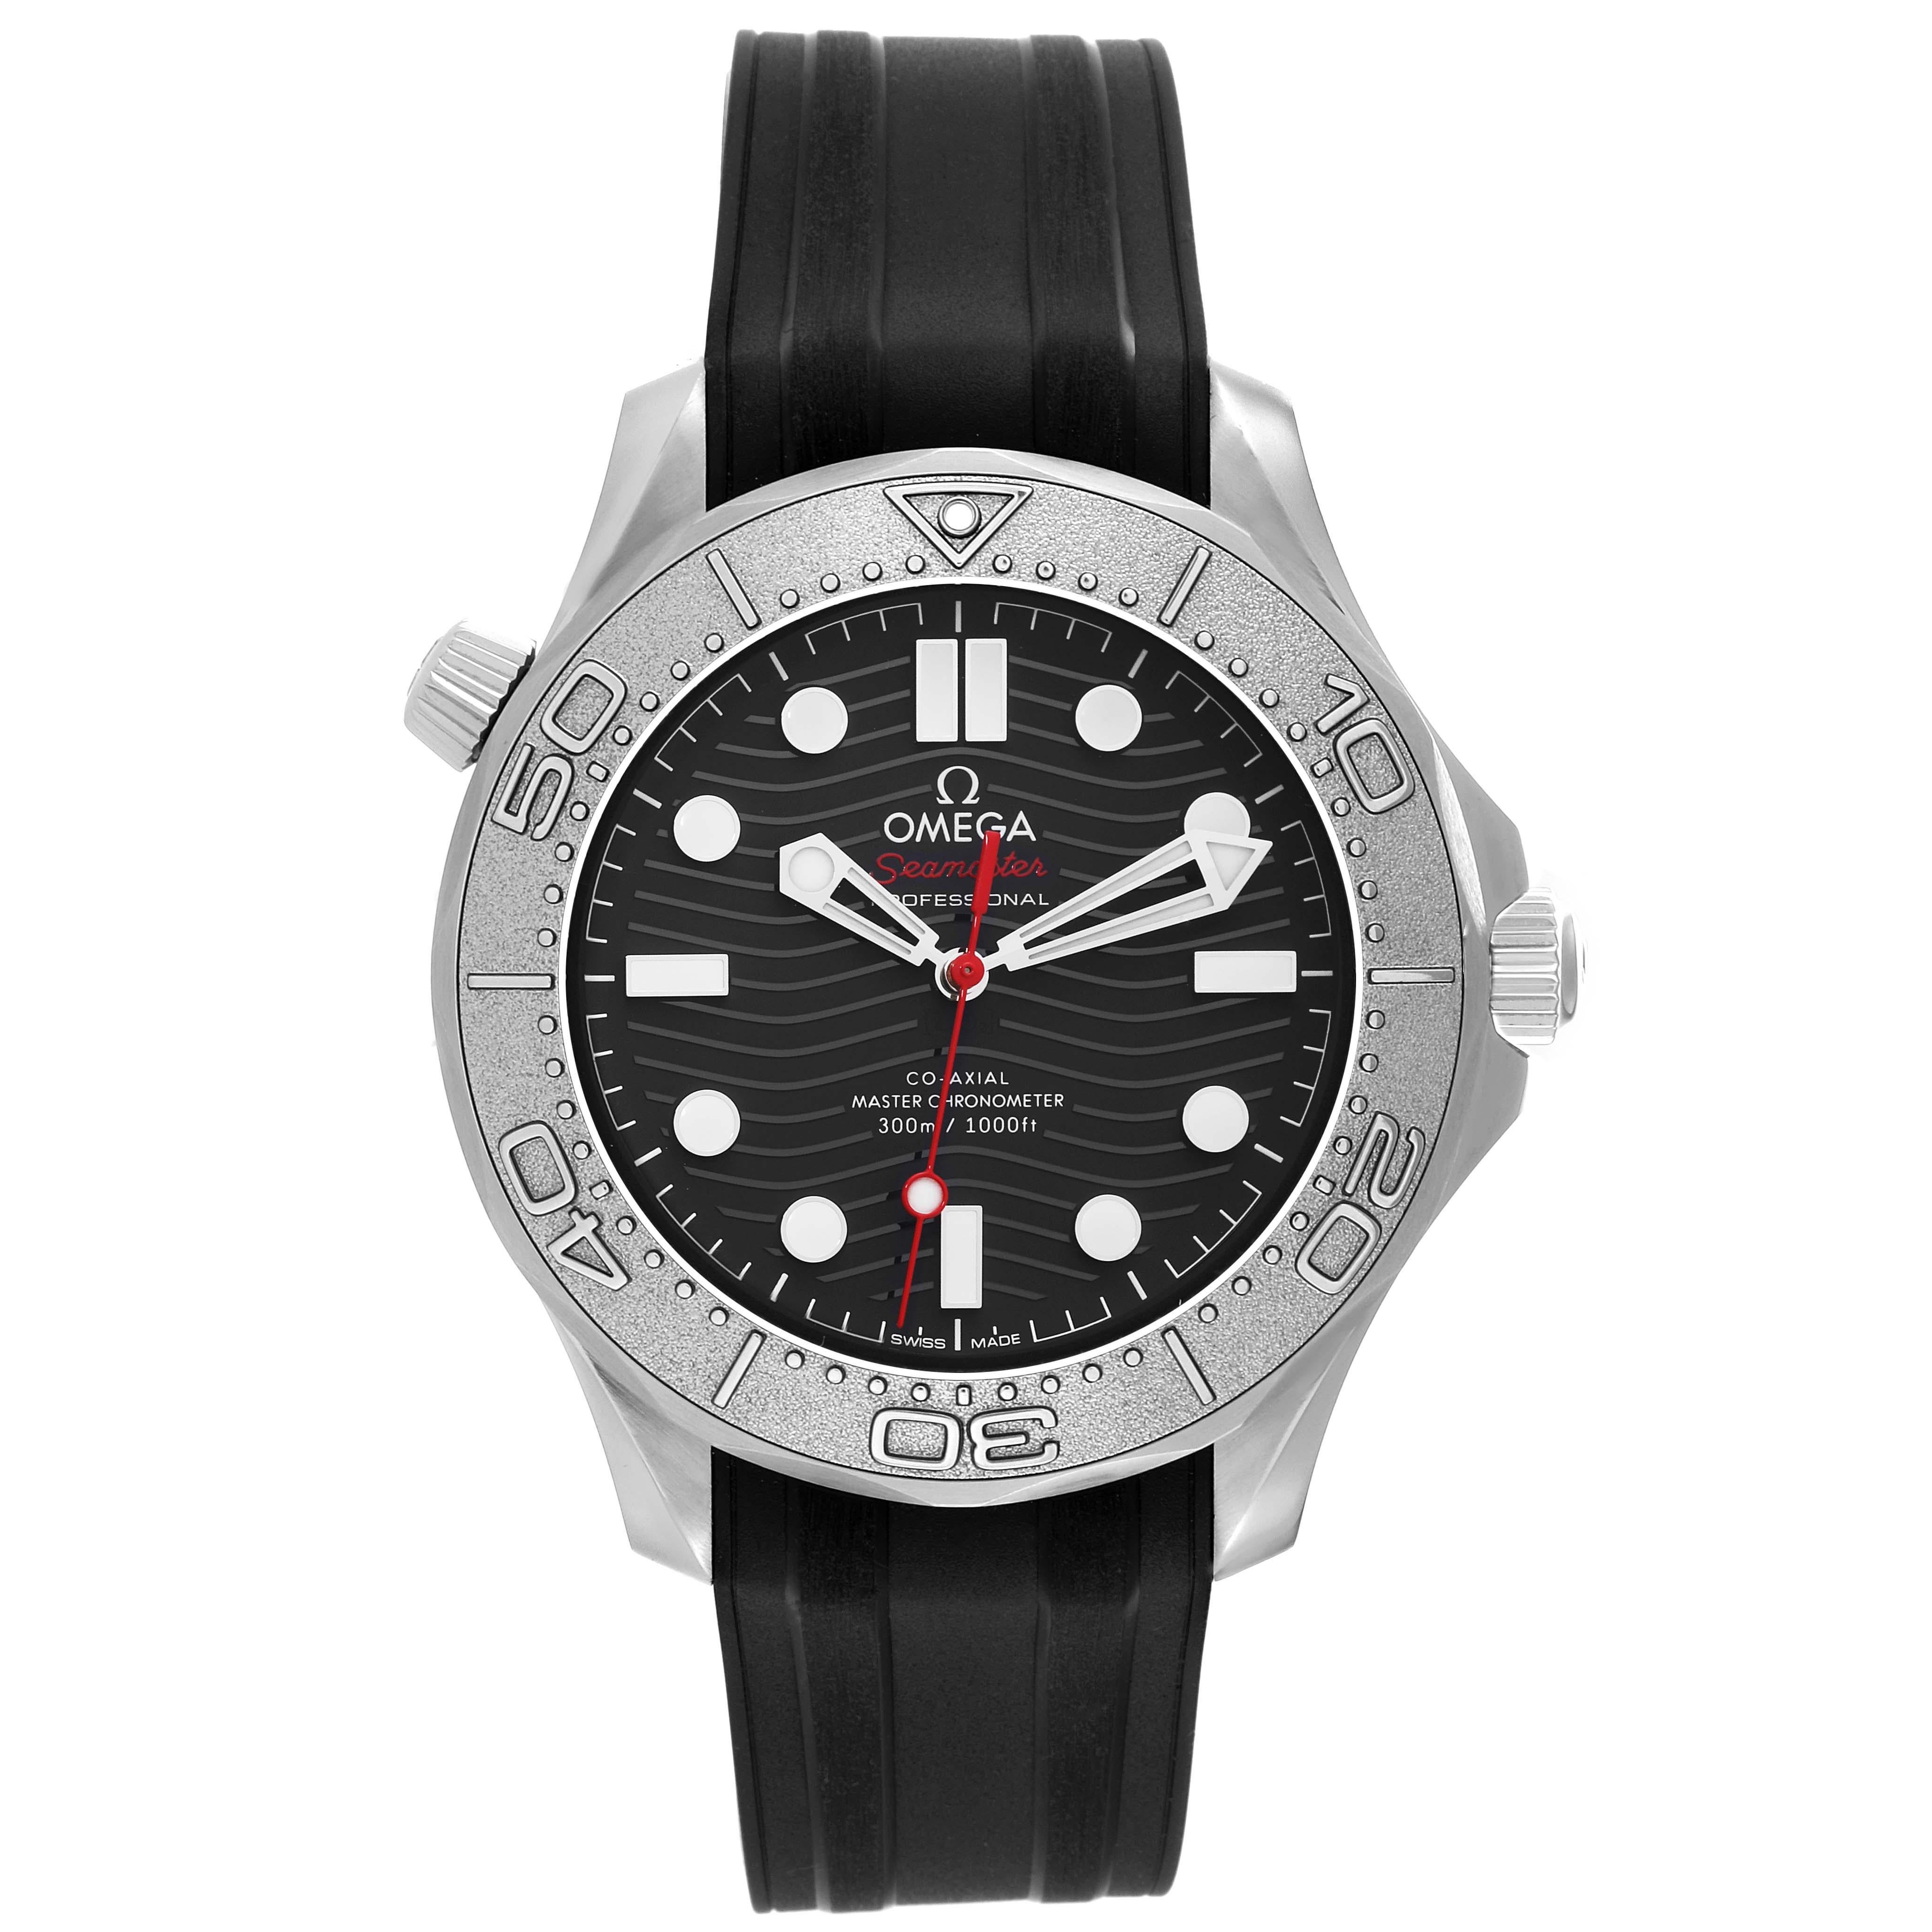 Omega Seamaster Diver Nekton Edition Steel Mens Watch 210.32.42.20.01.002 Box Card. Automatic Self-winding movement with Co-Axial escapement. Certified Master Chronometer, approved by METAS, resistant to magnetic fields reaching 15,000 gauss. Free